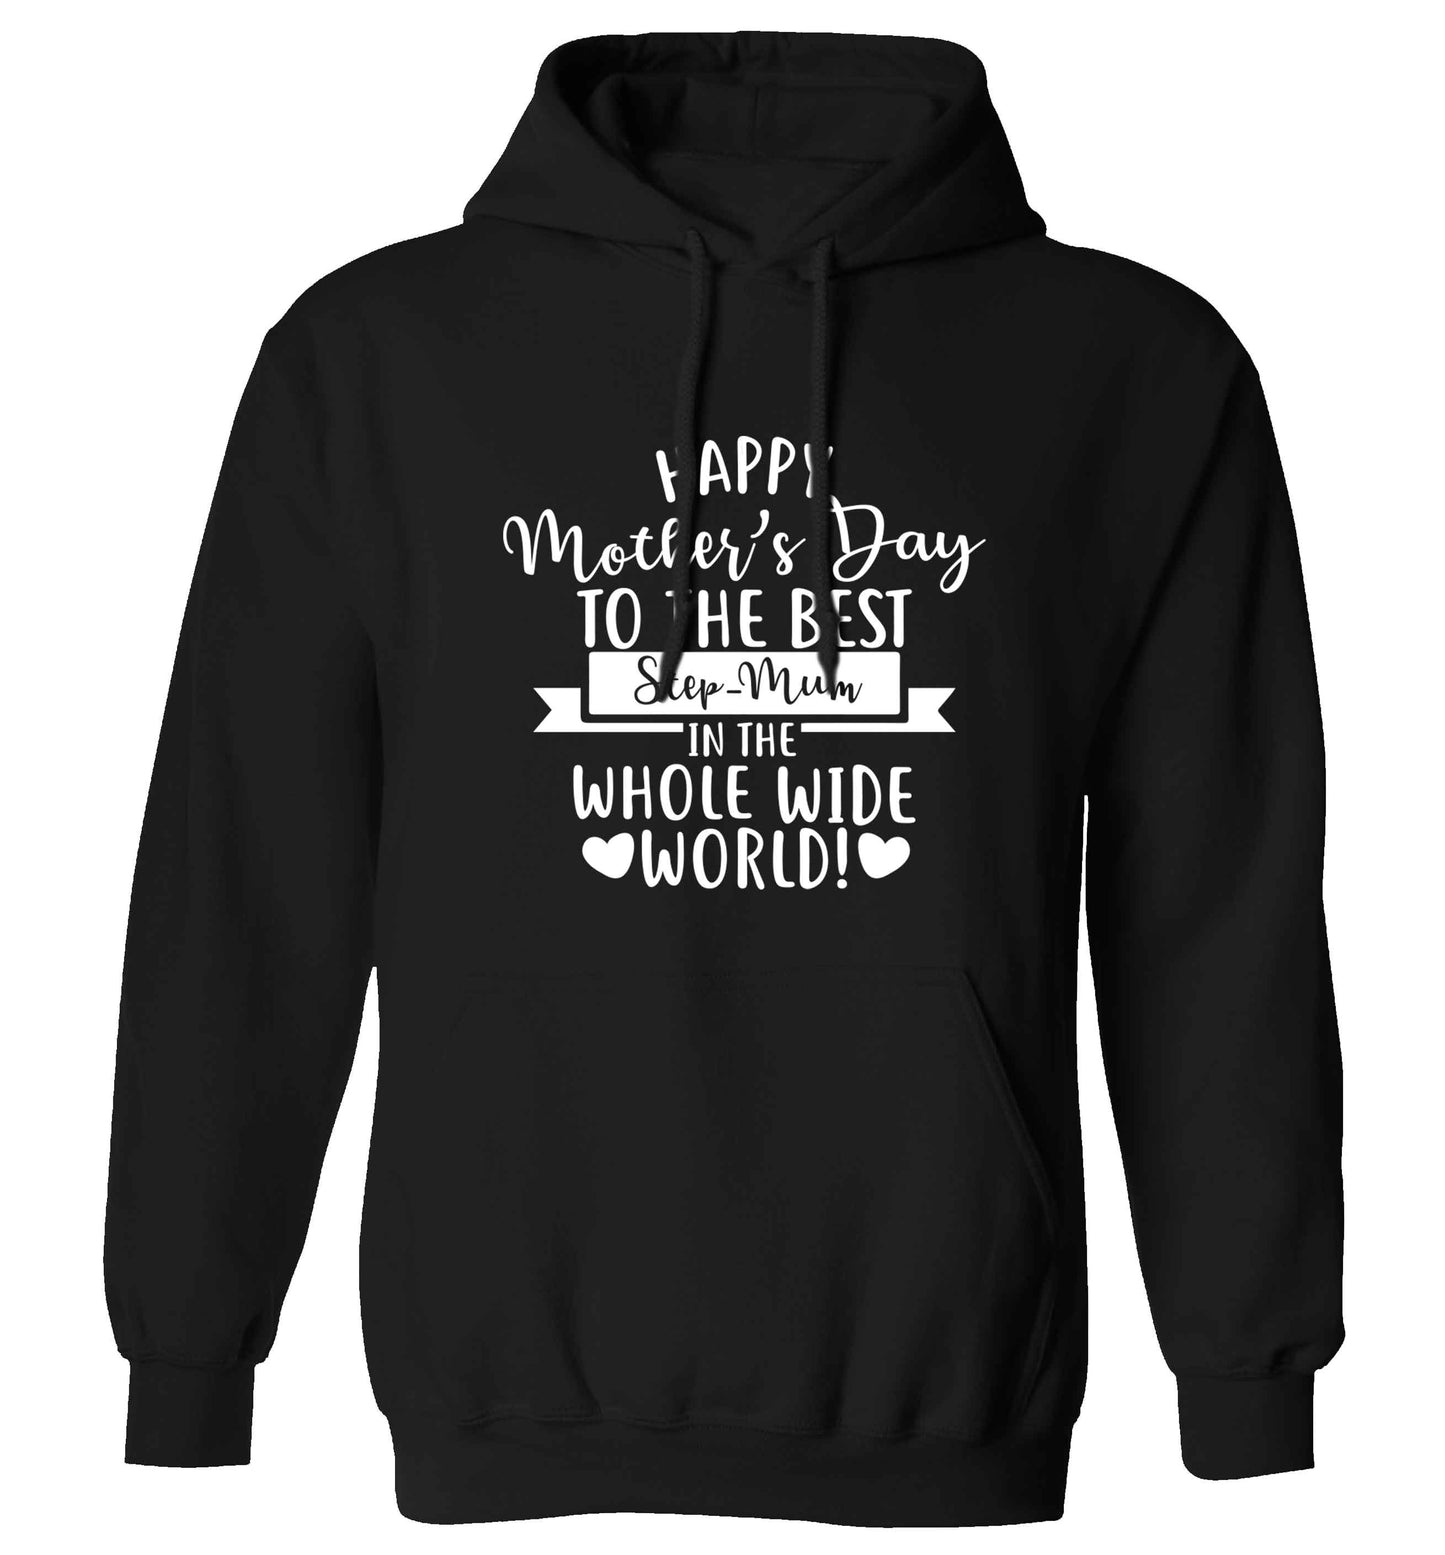 Happy mother's day to the best step-mum in the world adults unisex black hoodie 2XL